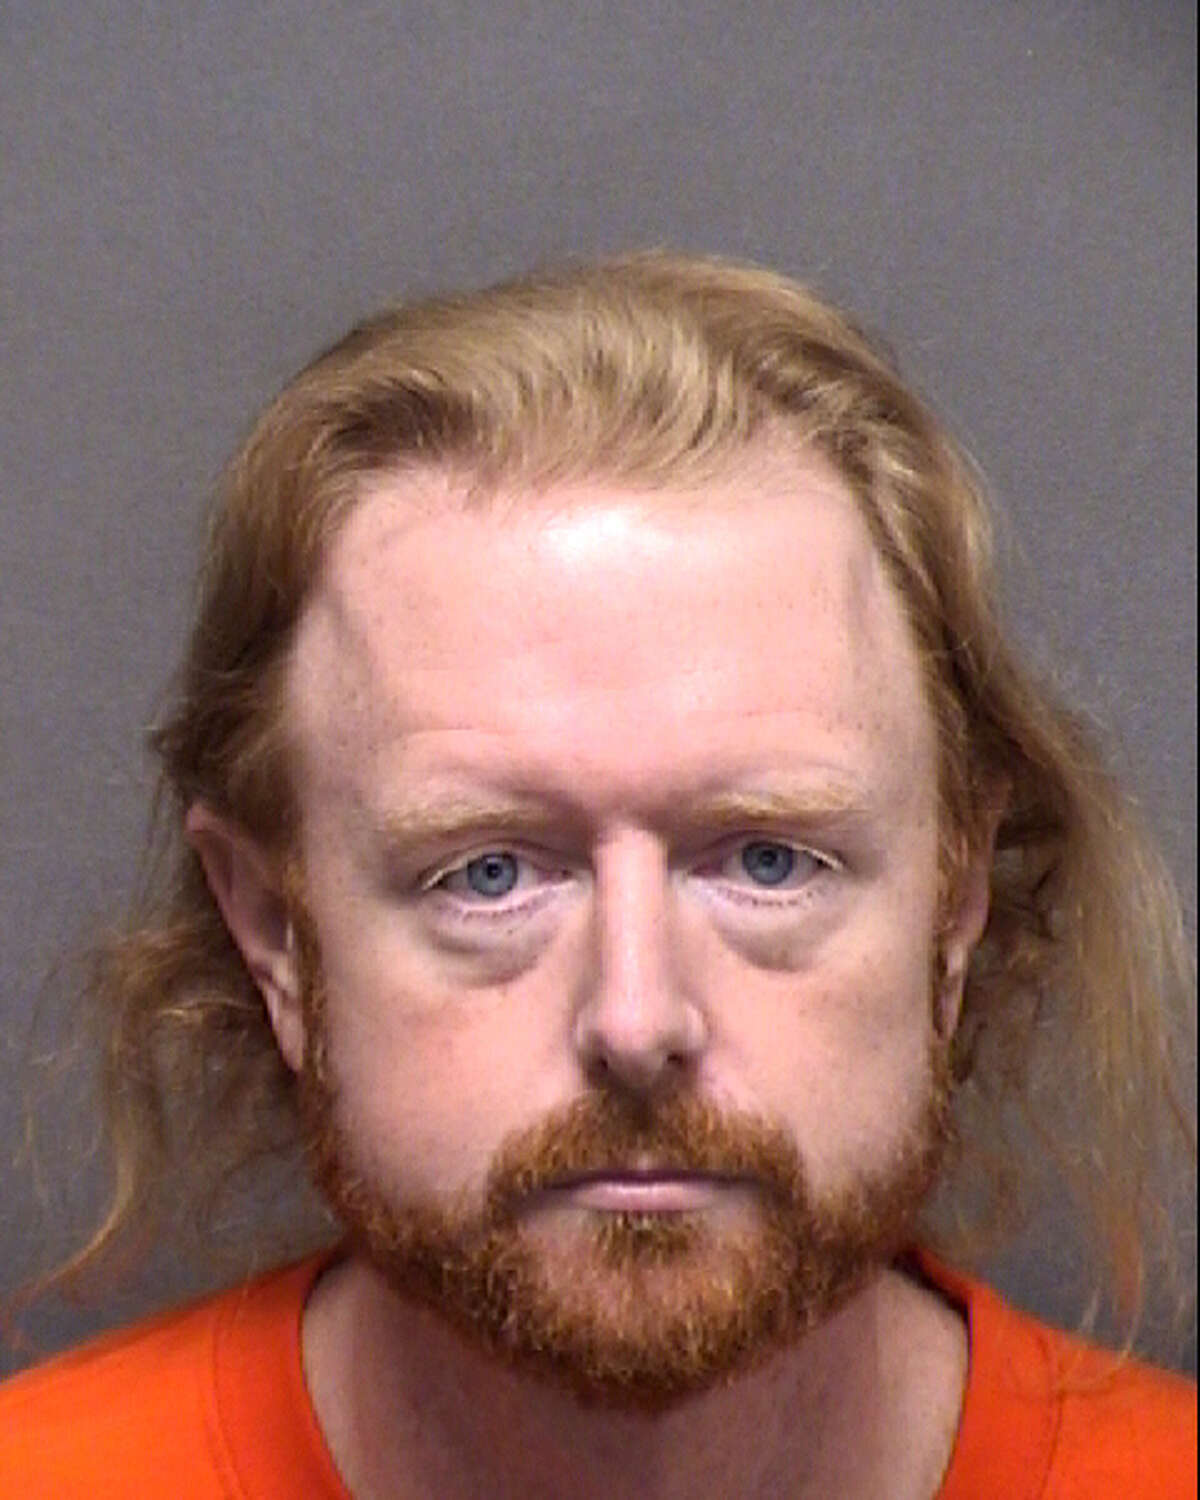 James Locklin, 40, is facing sexual assault charges of a child. Locklin worked for Alamo Heights ISD when the alleged incident took place.